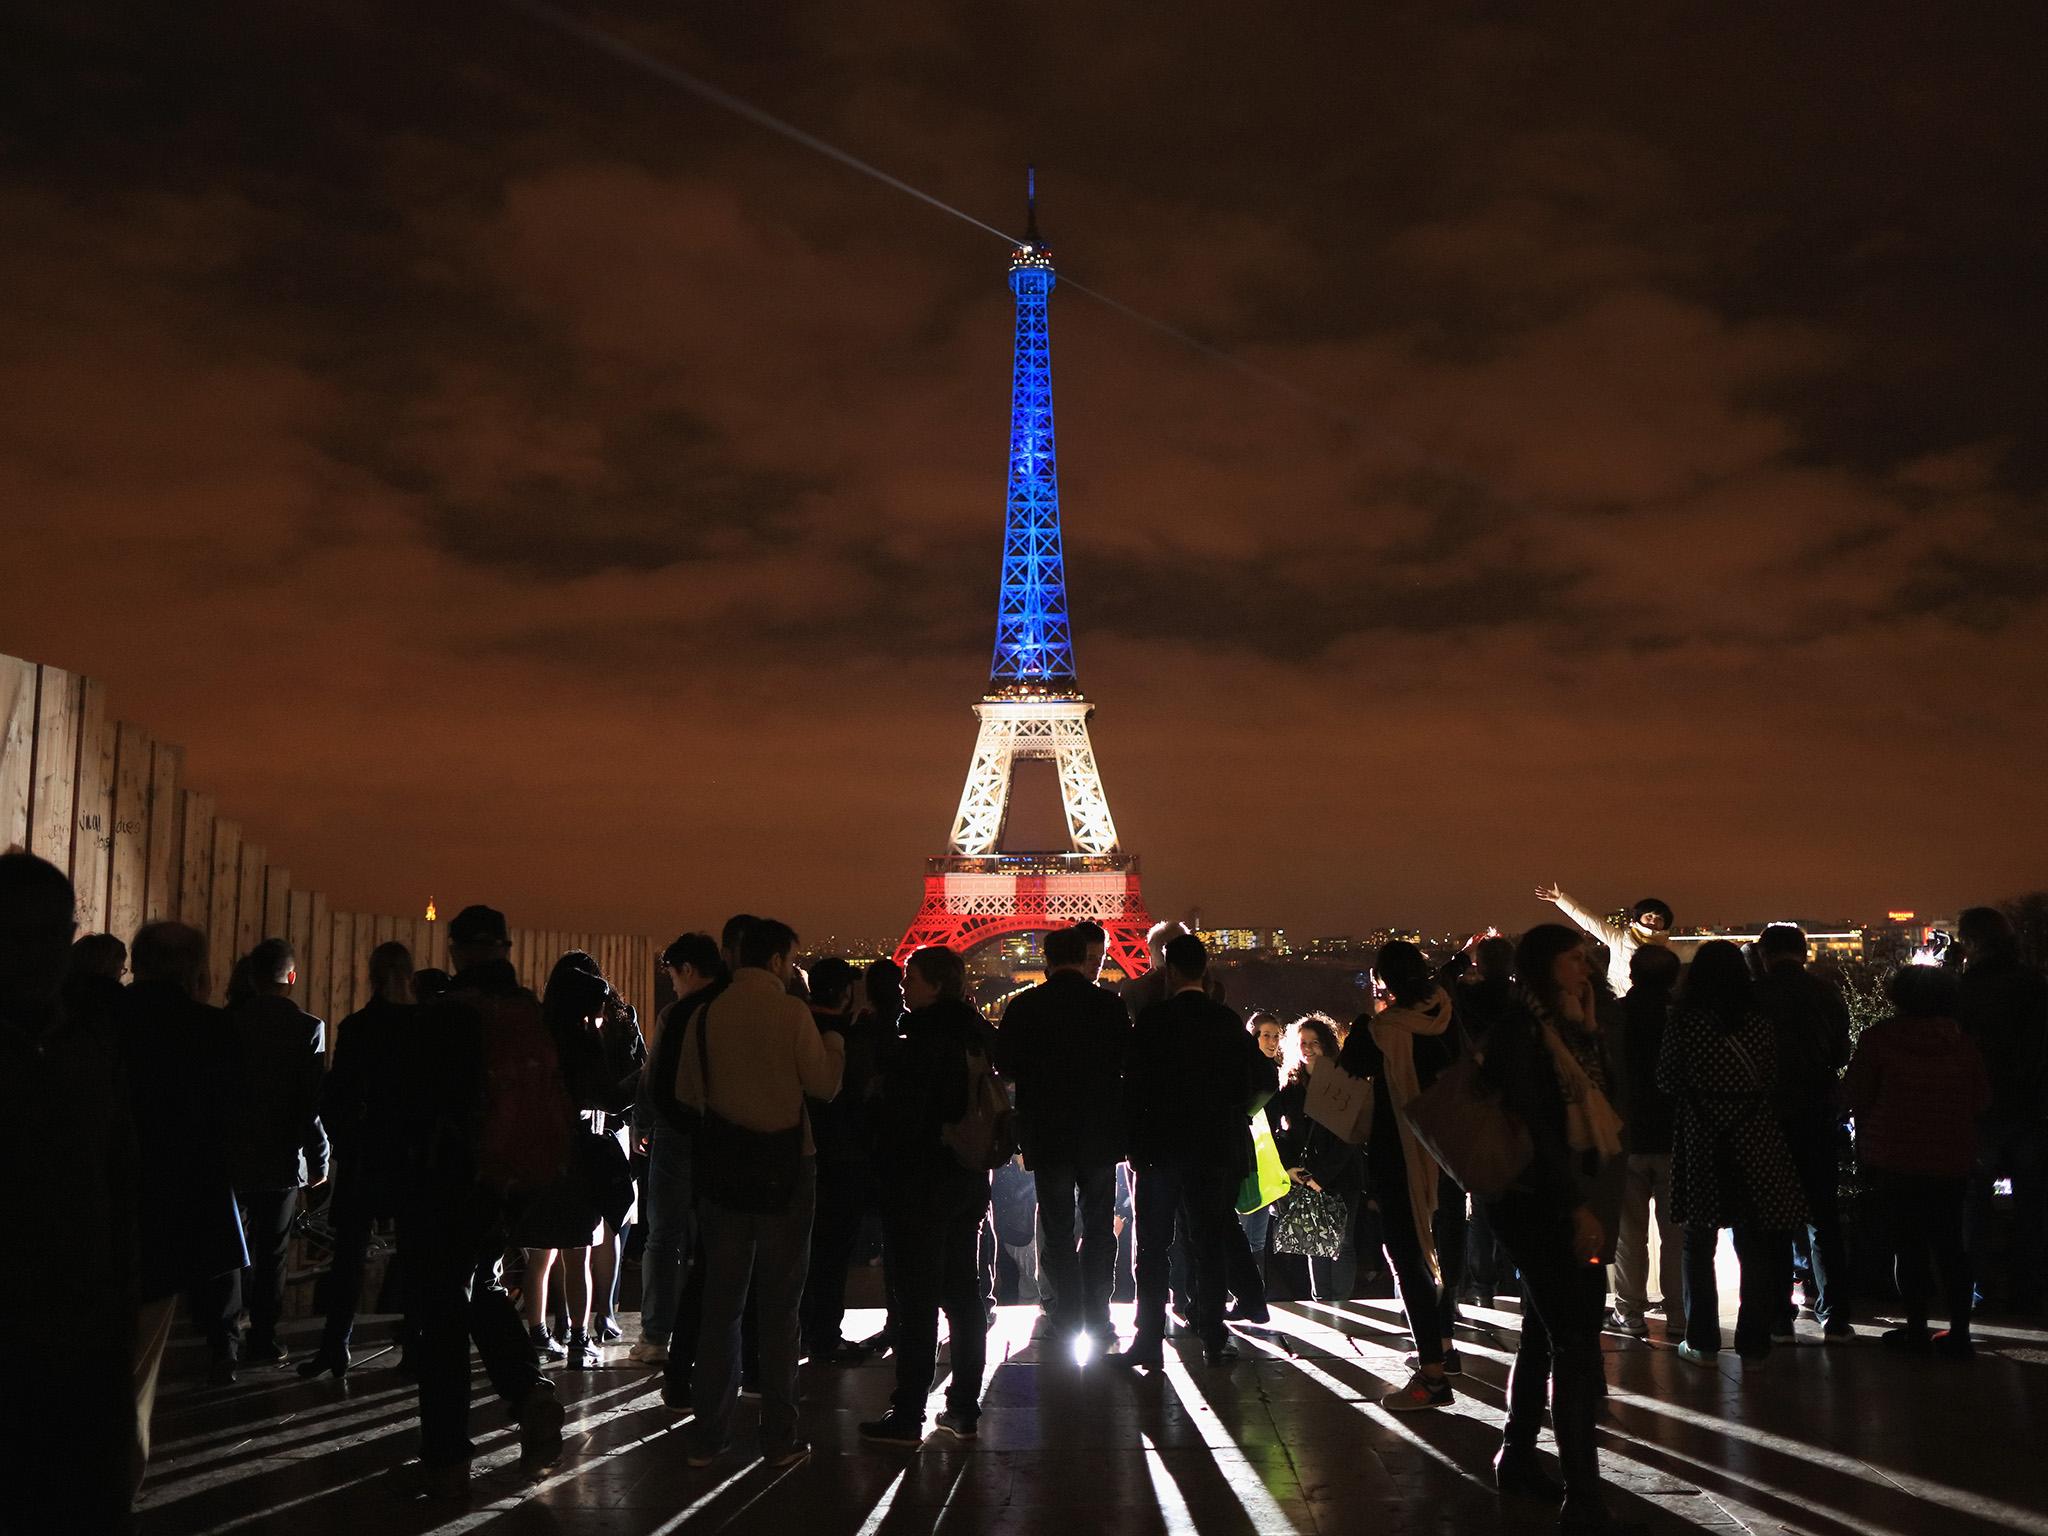 The Eiffel Tower is illuminated in red, white and blue in honour of the victims of the Paris terrorist attacks in November 2015